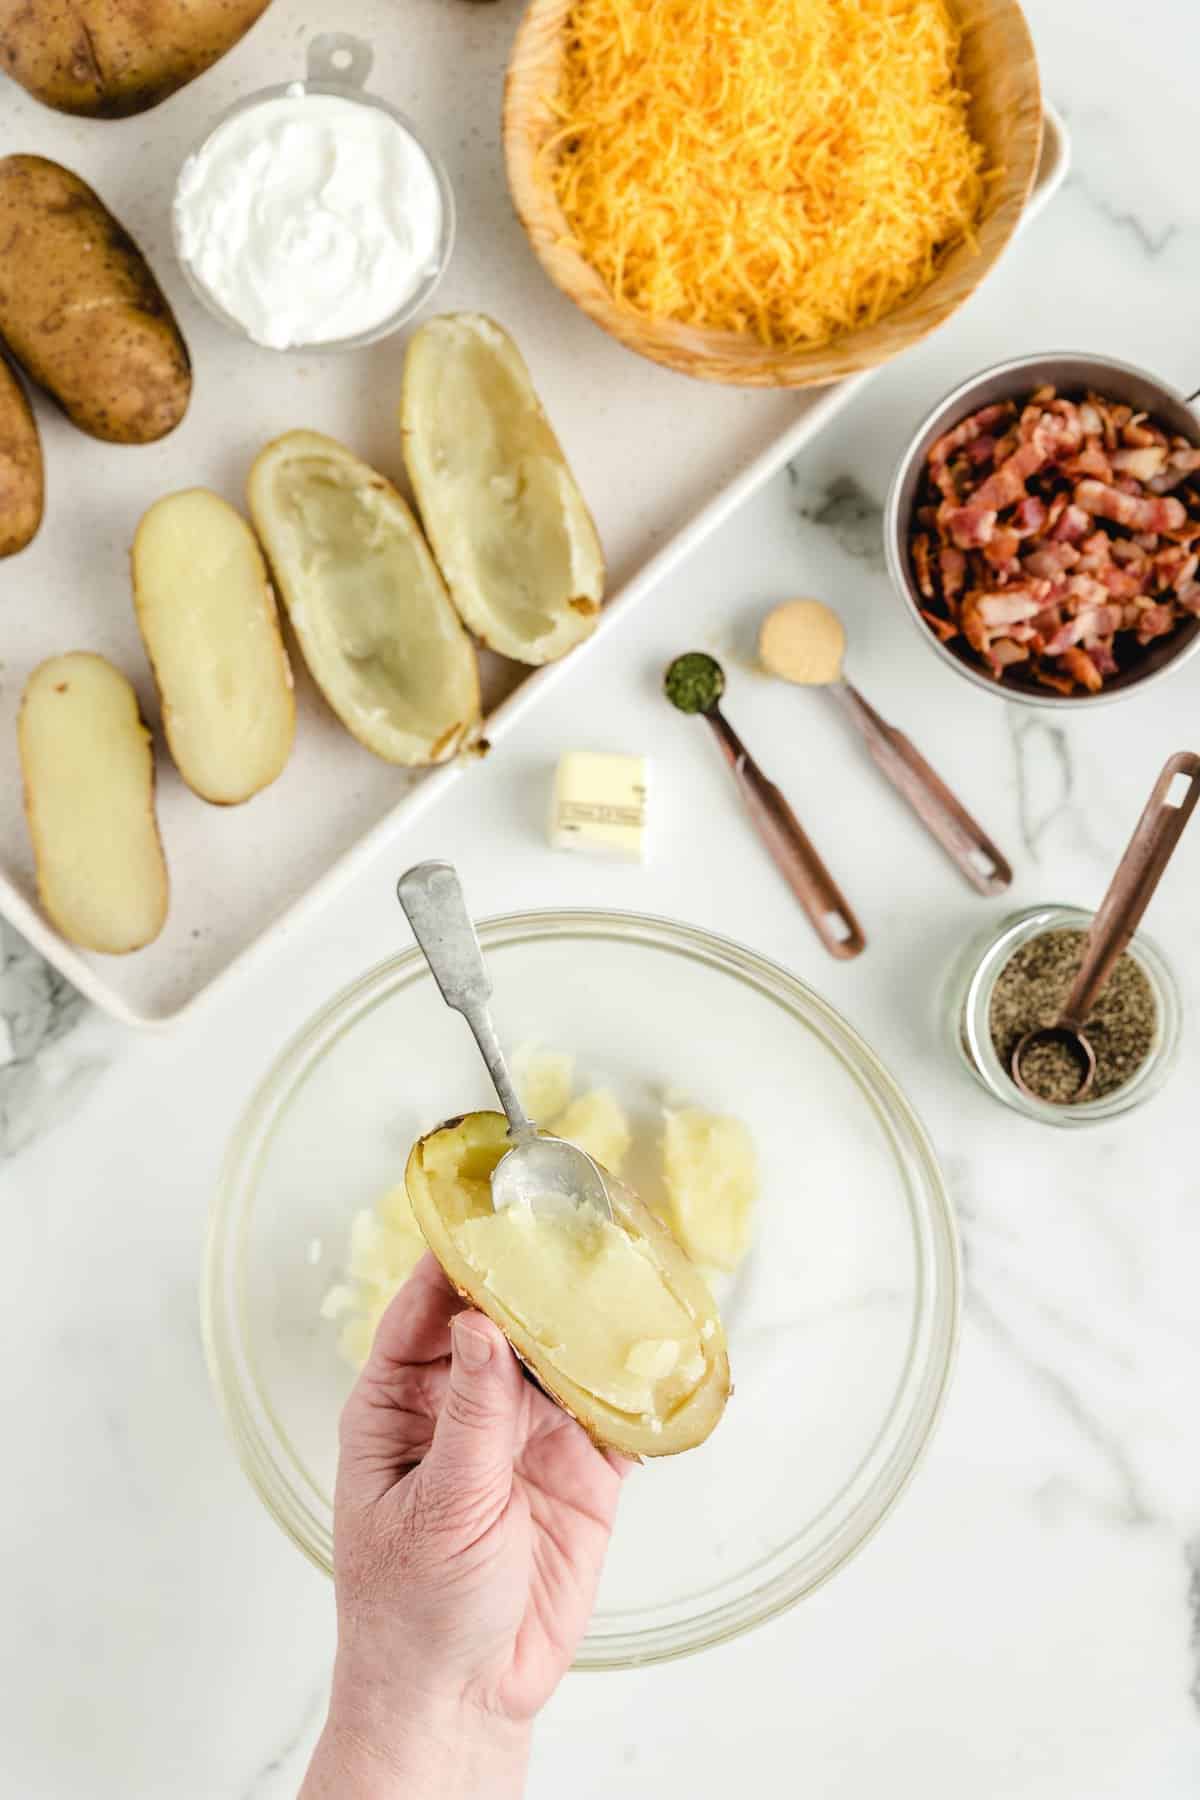 Spoon out most of the inside of the potato